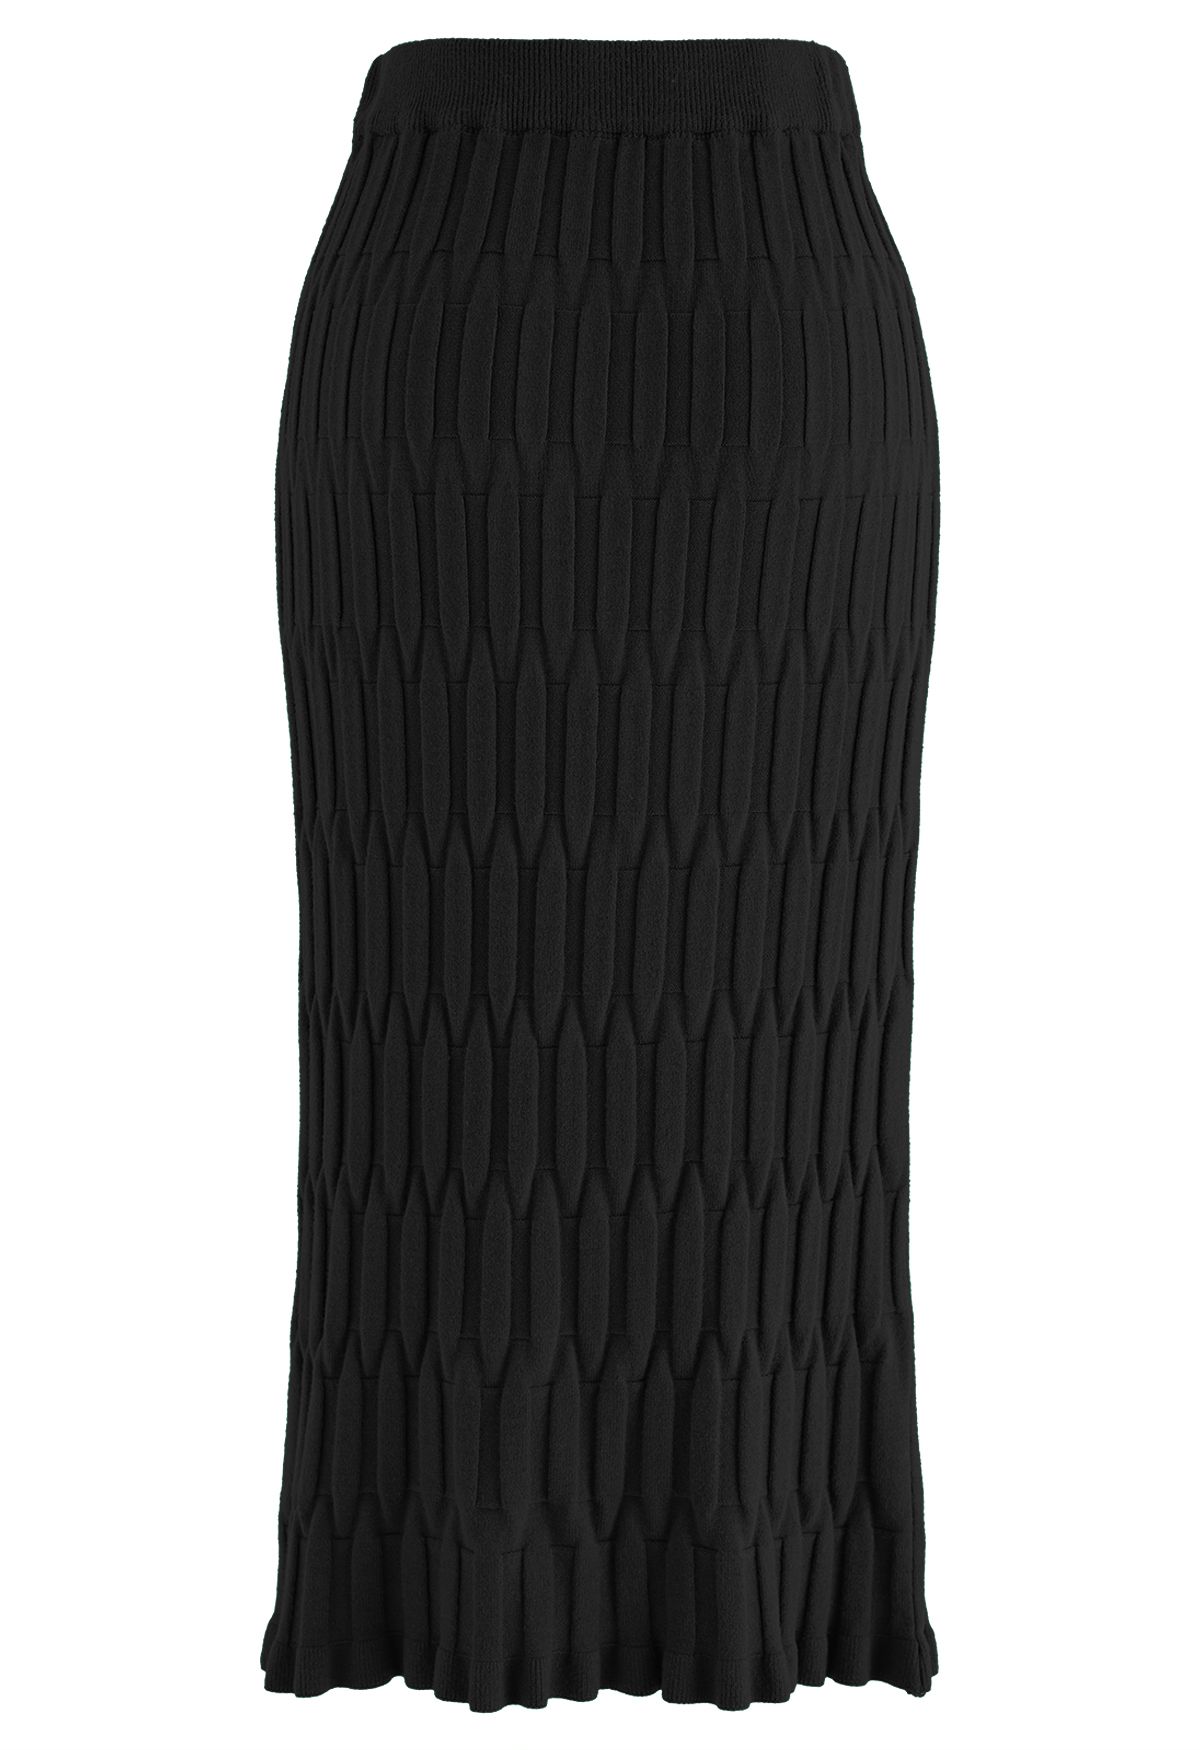 Embossed Texture Knit Pencil Skirt in Black - Retro, Indie and Unique ...